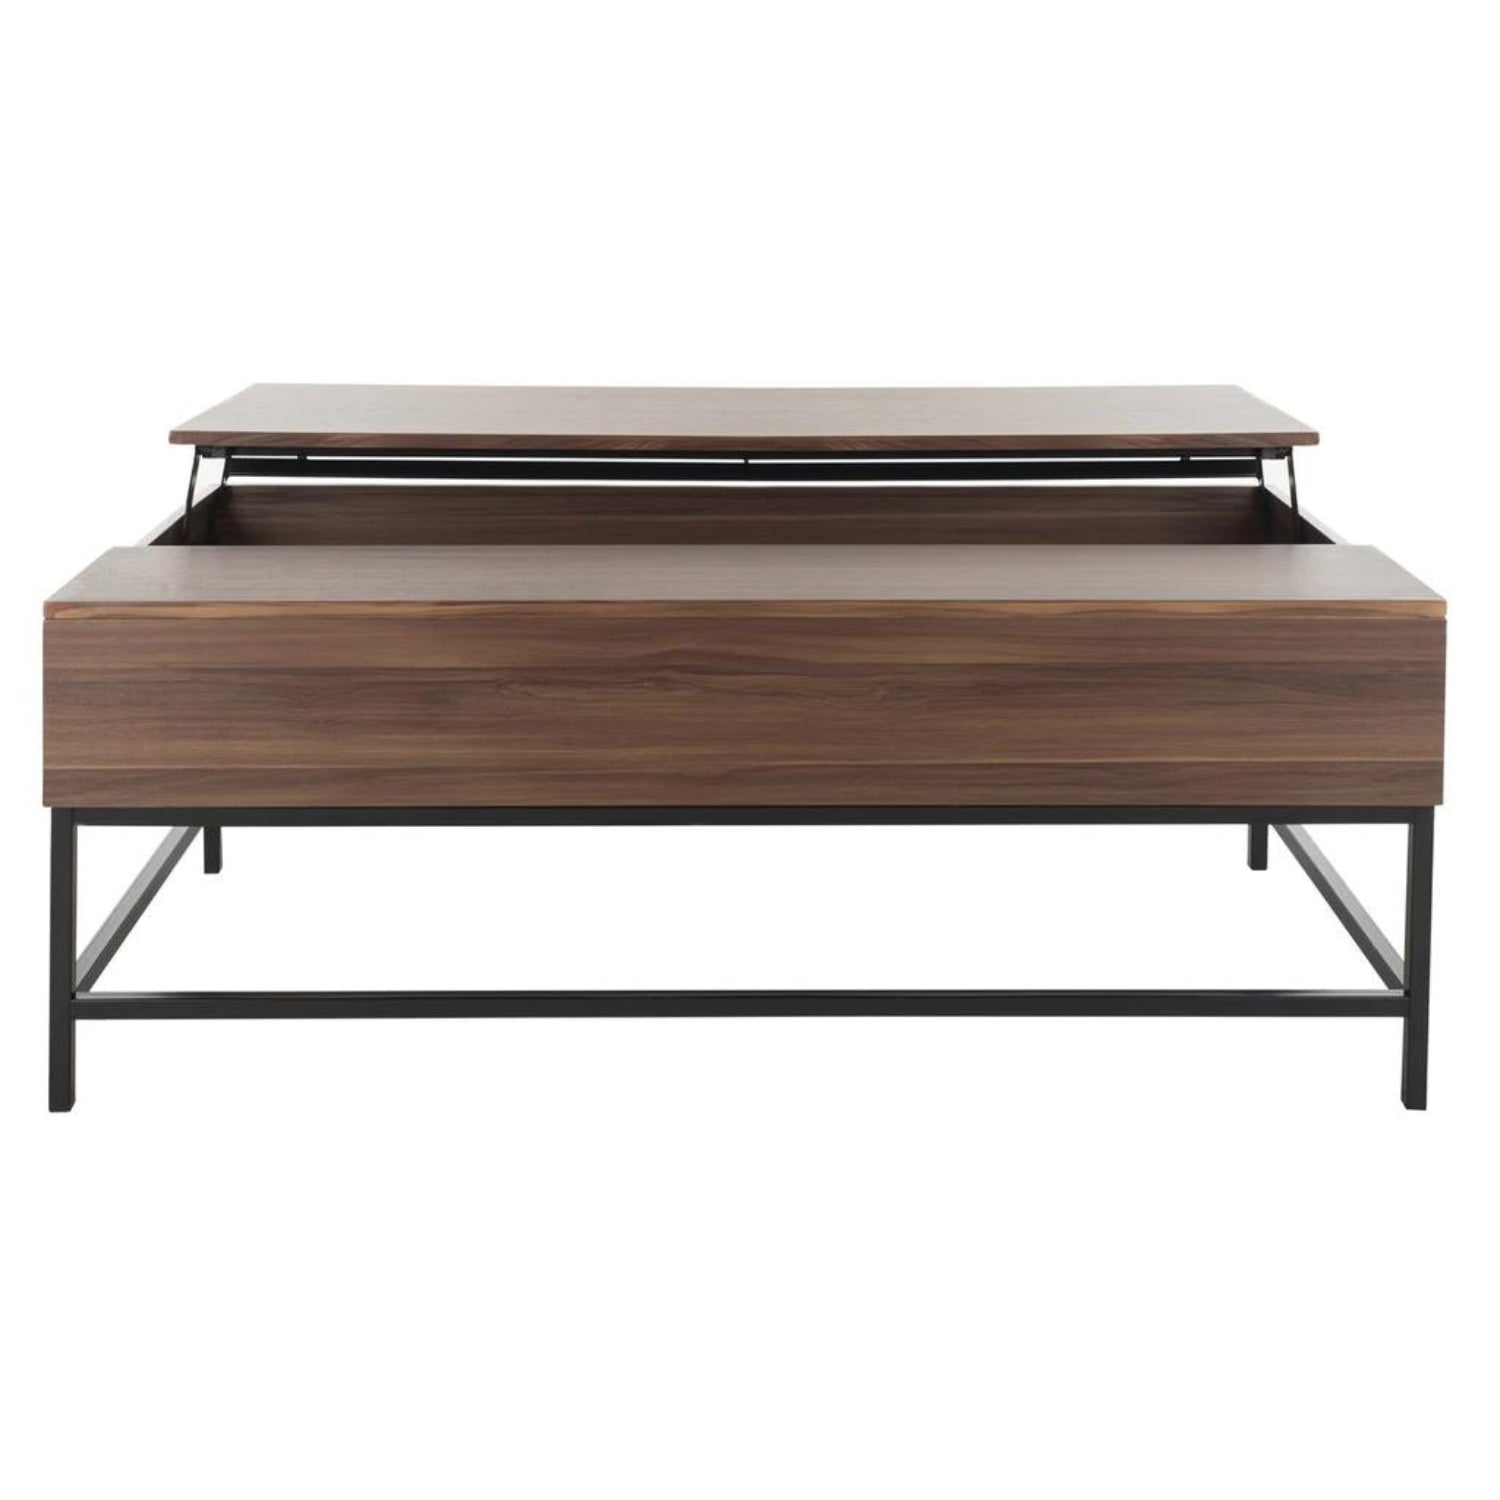 Askov Lift Top Coffee Table with wooden top and metal frame.